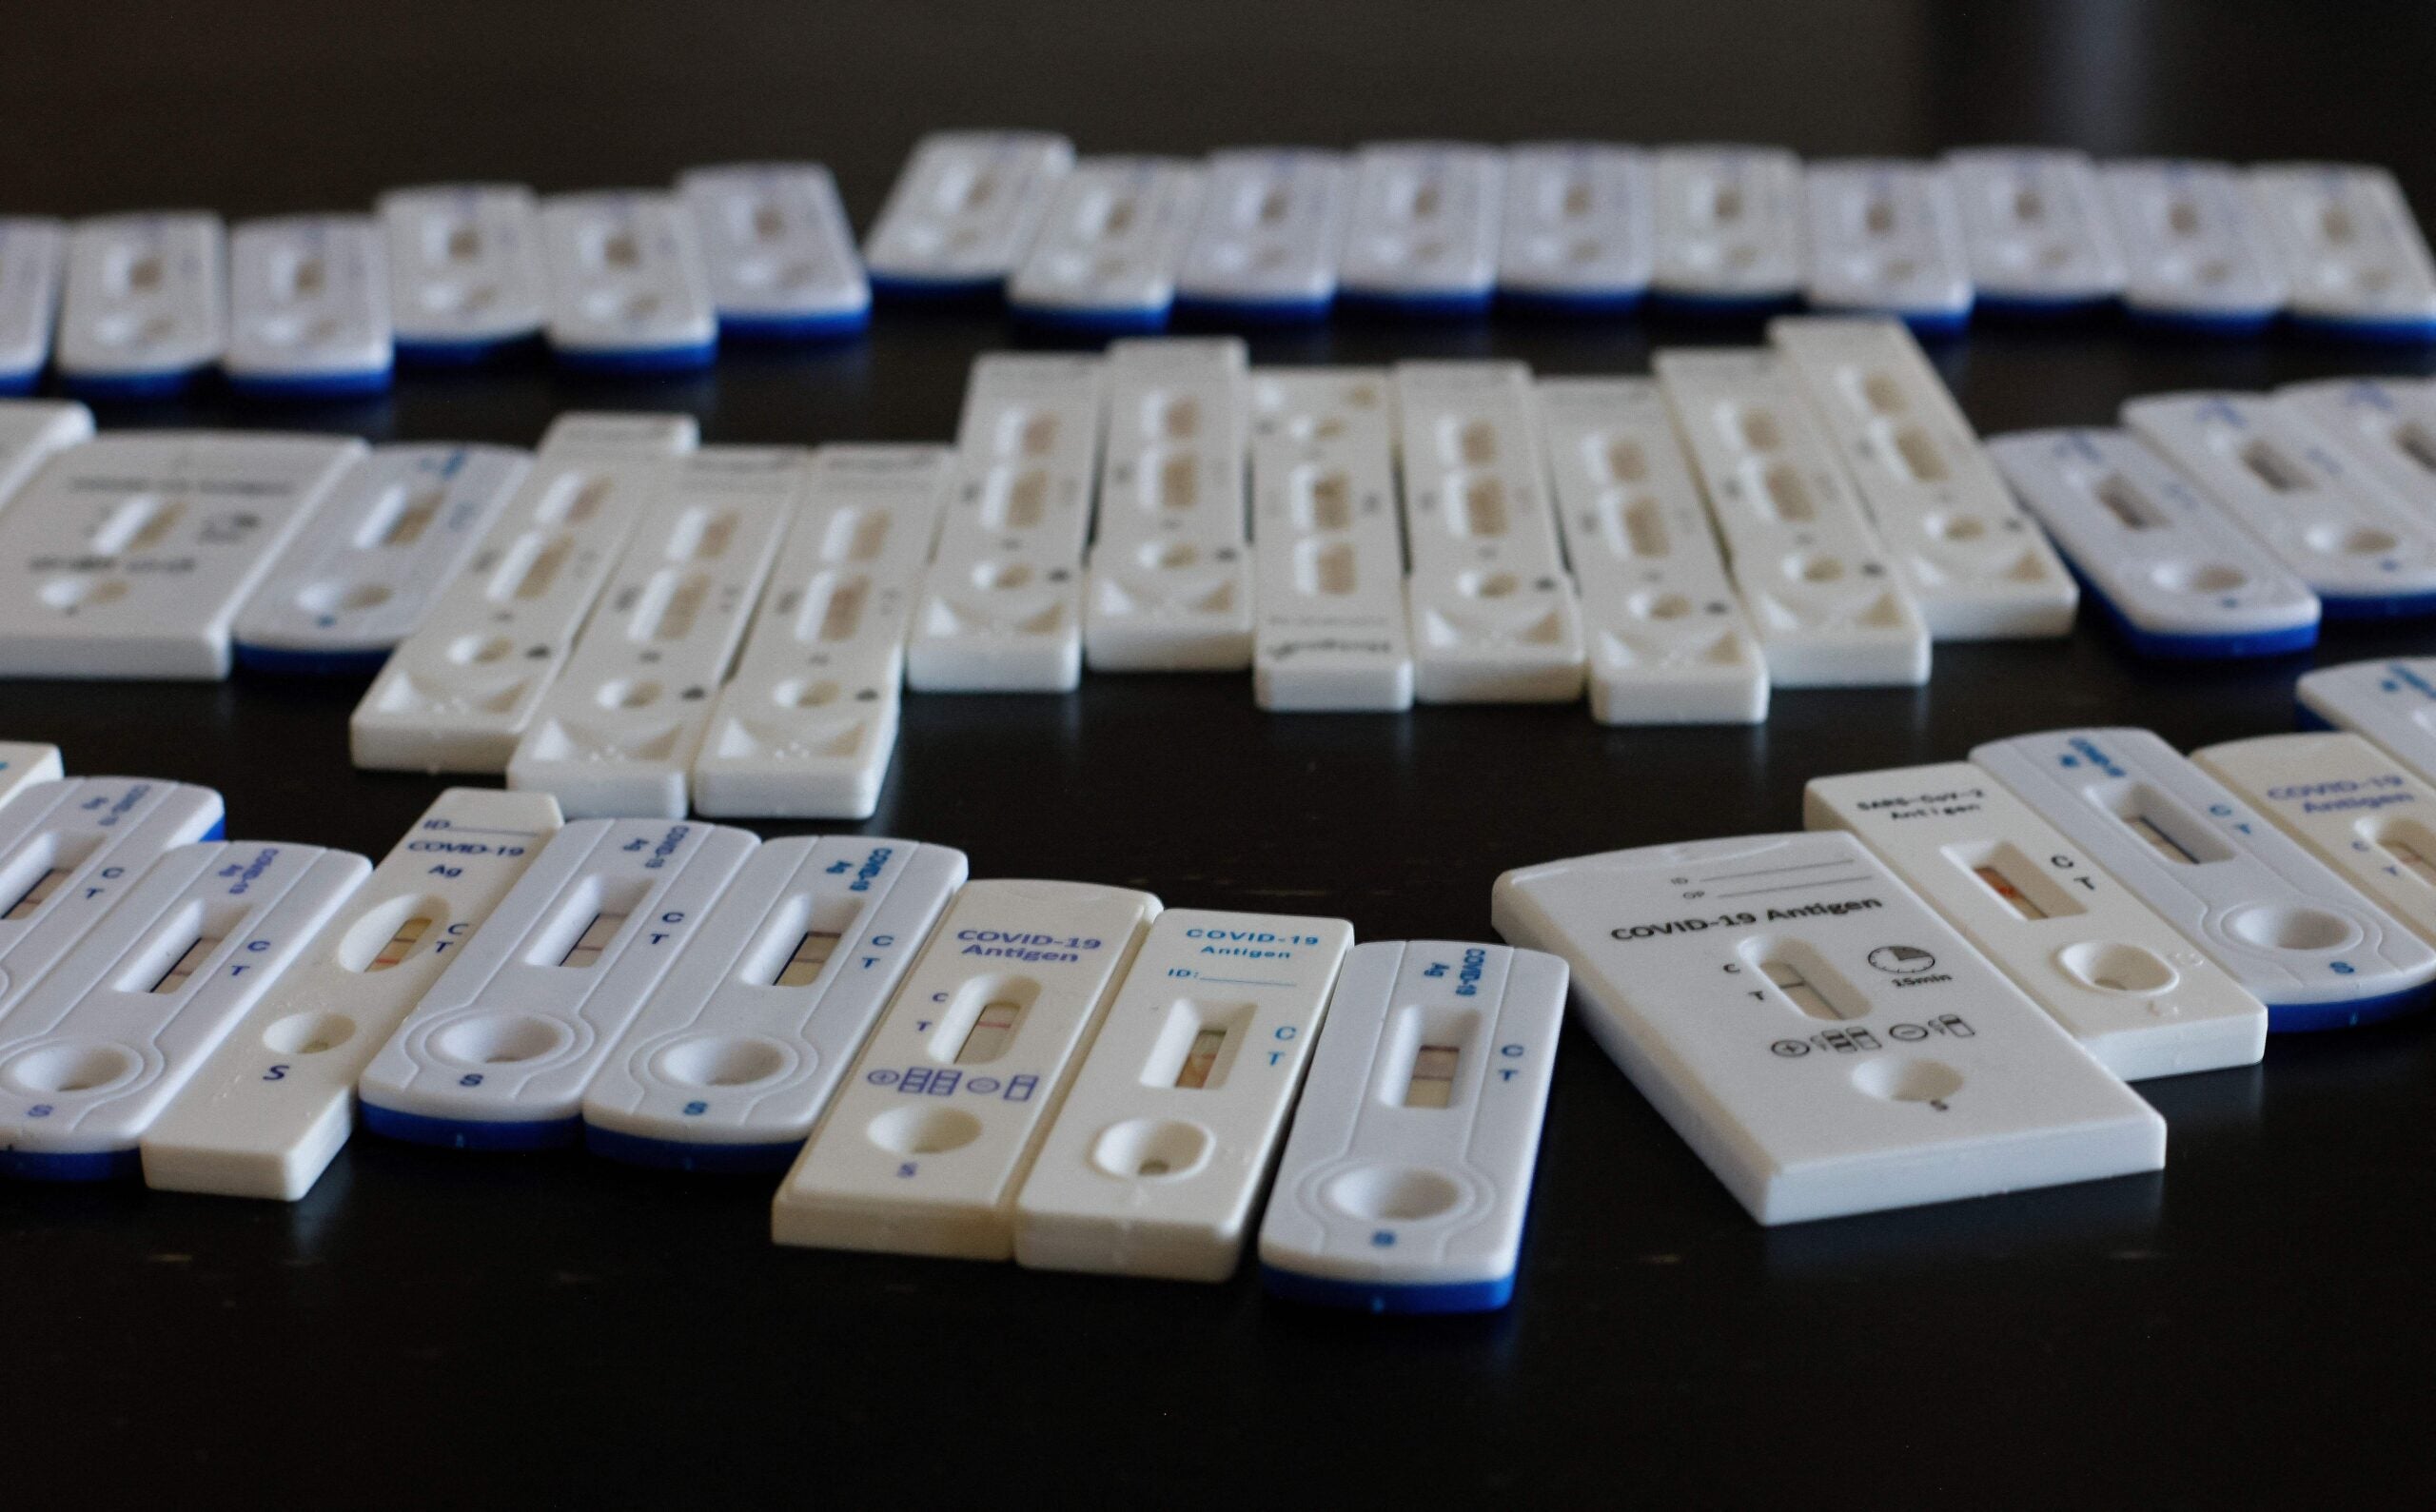 alt = COVID-19 Antigen rapid tests, both negative and some positive, made and collected by one person over 18 months of the coronavirus COVID-19 pandemic.